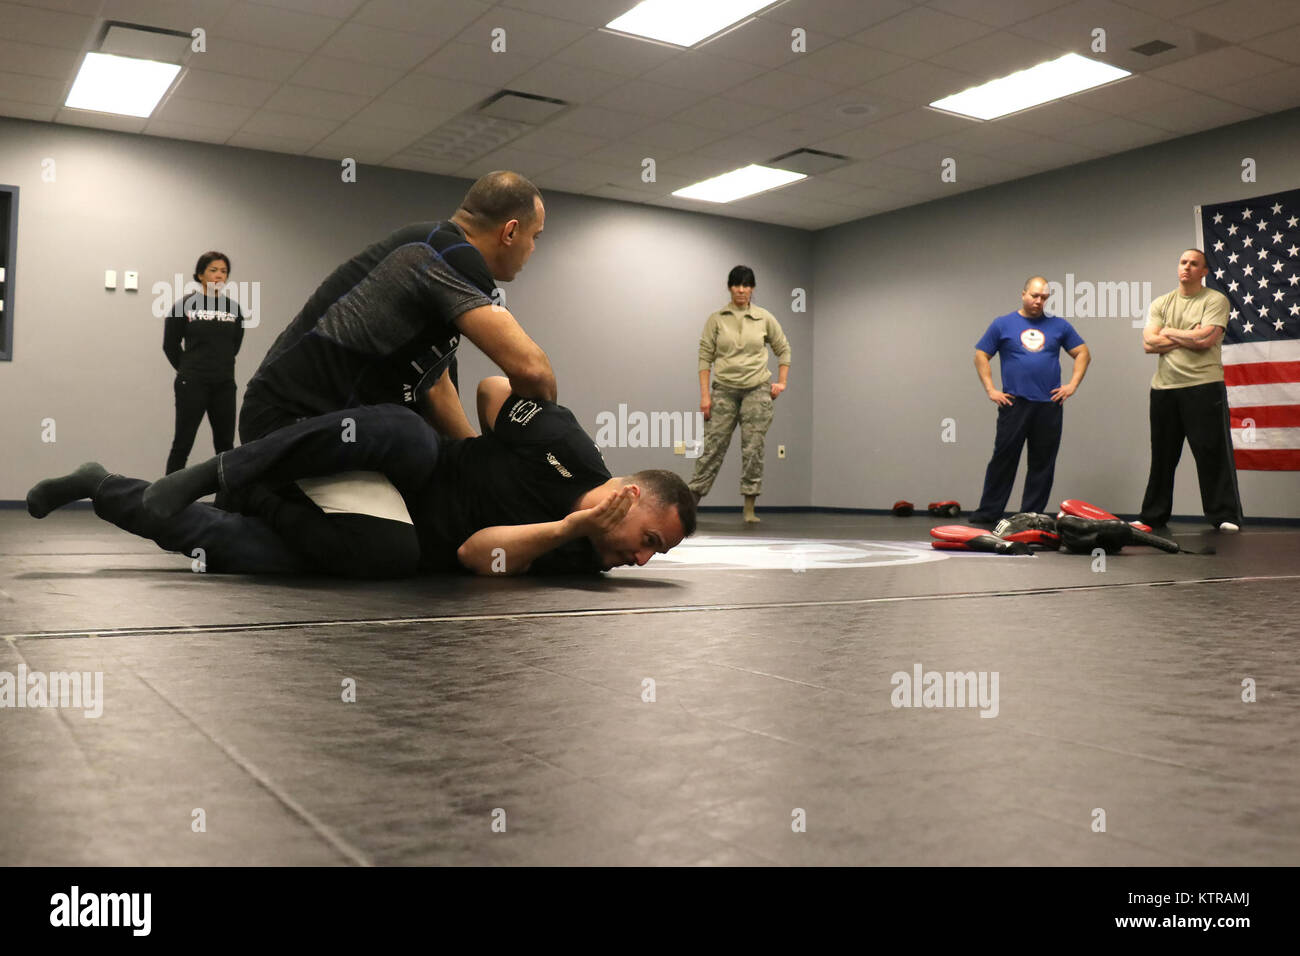 Luigi Mondelli, Brazilian Jiu Jitsu 4th degree black belt, demonstrates ground control and handcuffing techniques on Brazilian Jiu Jitsu brown belt Marcos Borges at Stewart Air National Guard Base, NY, on March 4, 2017. Instructors from American Top Team in Conneticut travel to Stewart Air National Guard Base to teach real-life self defense tactics to Air National Guardsmen. (U.S. Air National Guard photo by Master Sgt. Lee Guagenti) Stock Photo